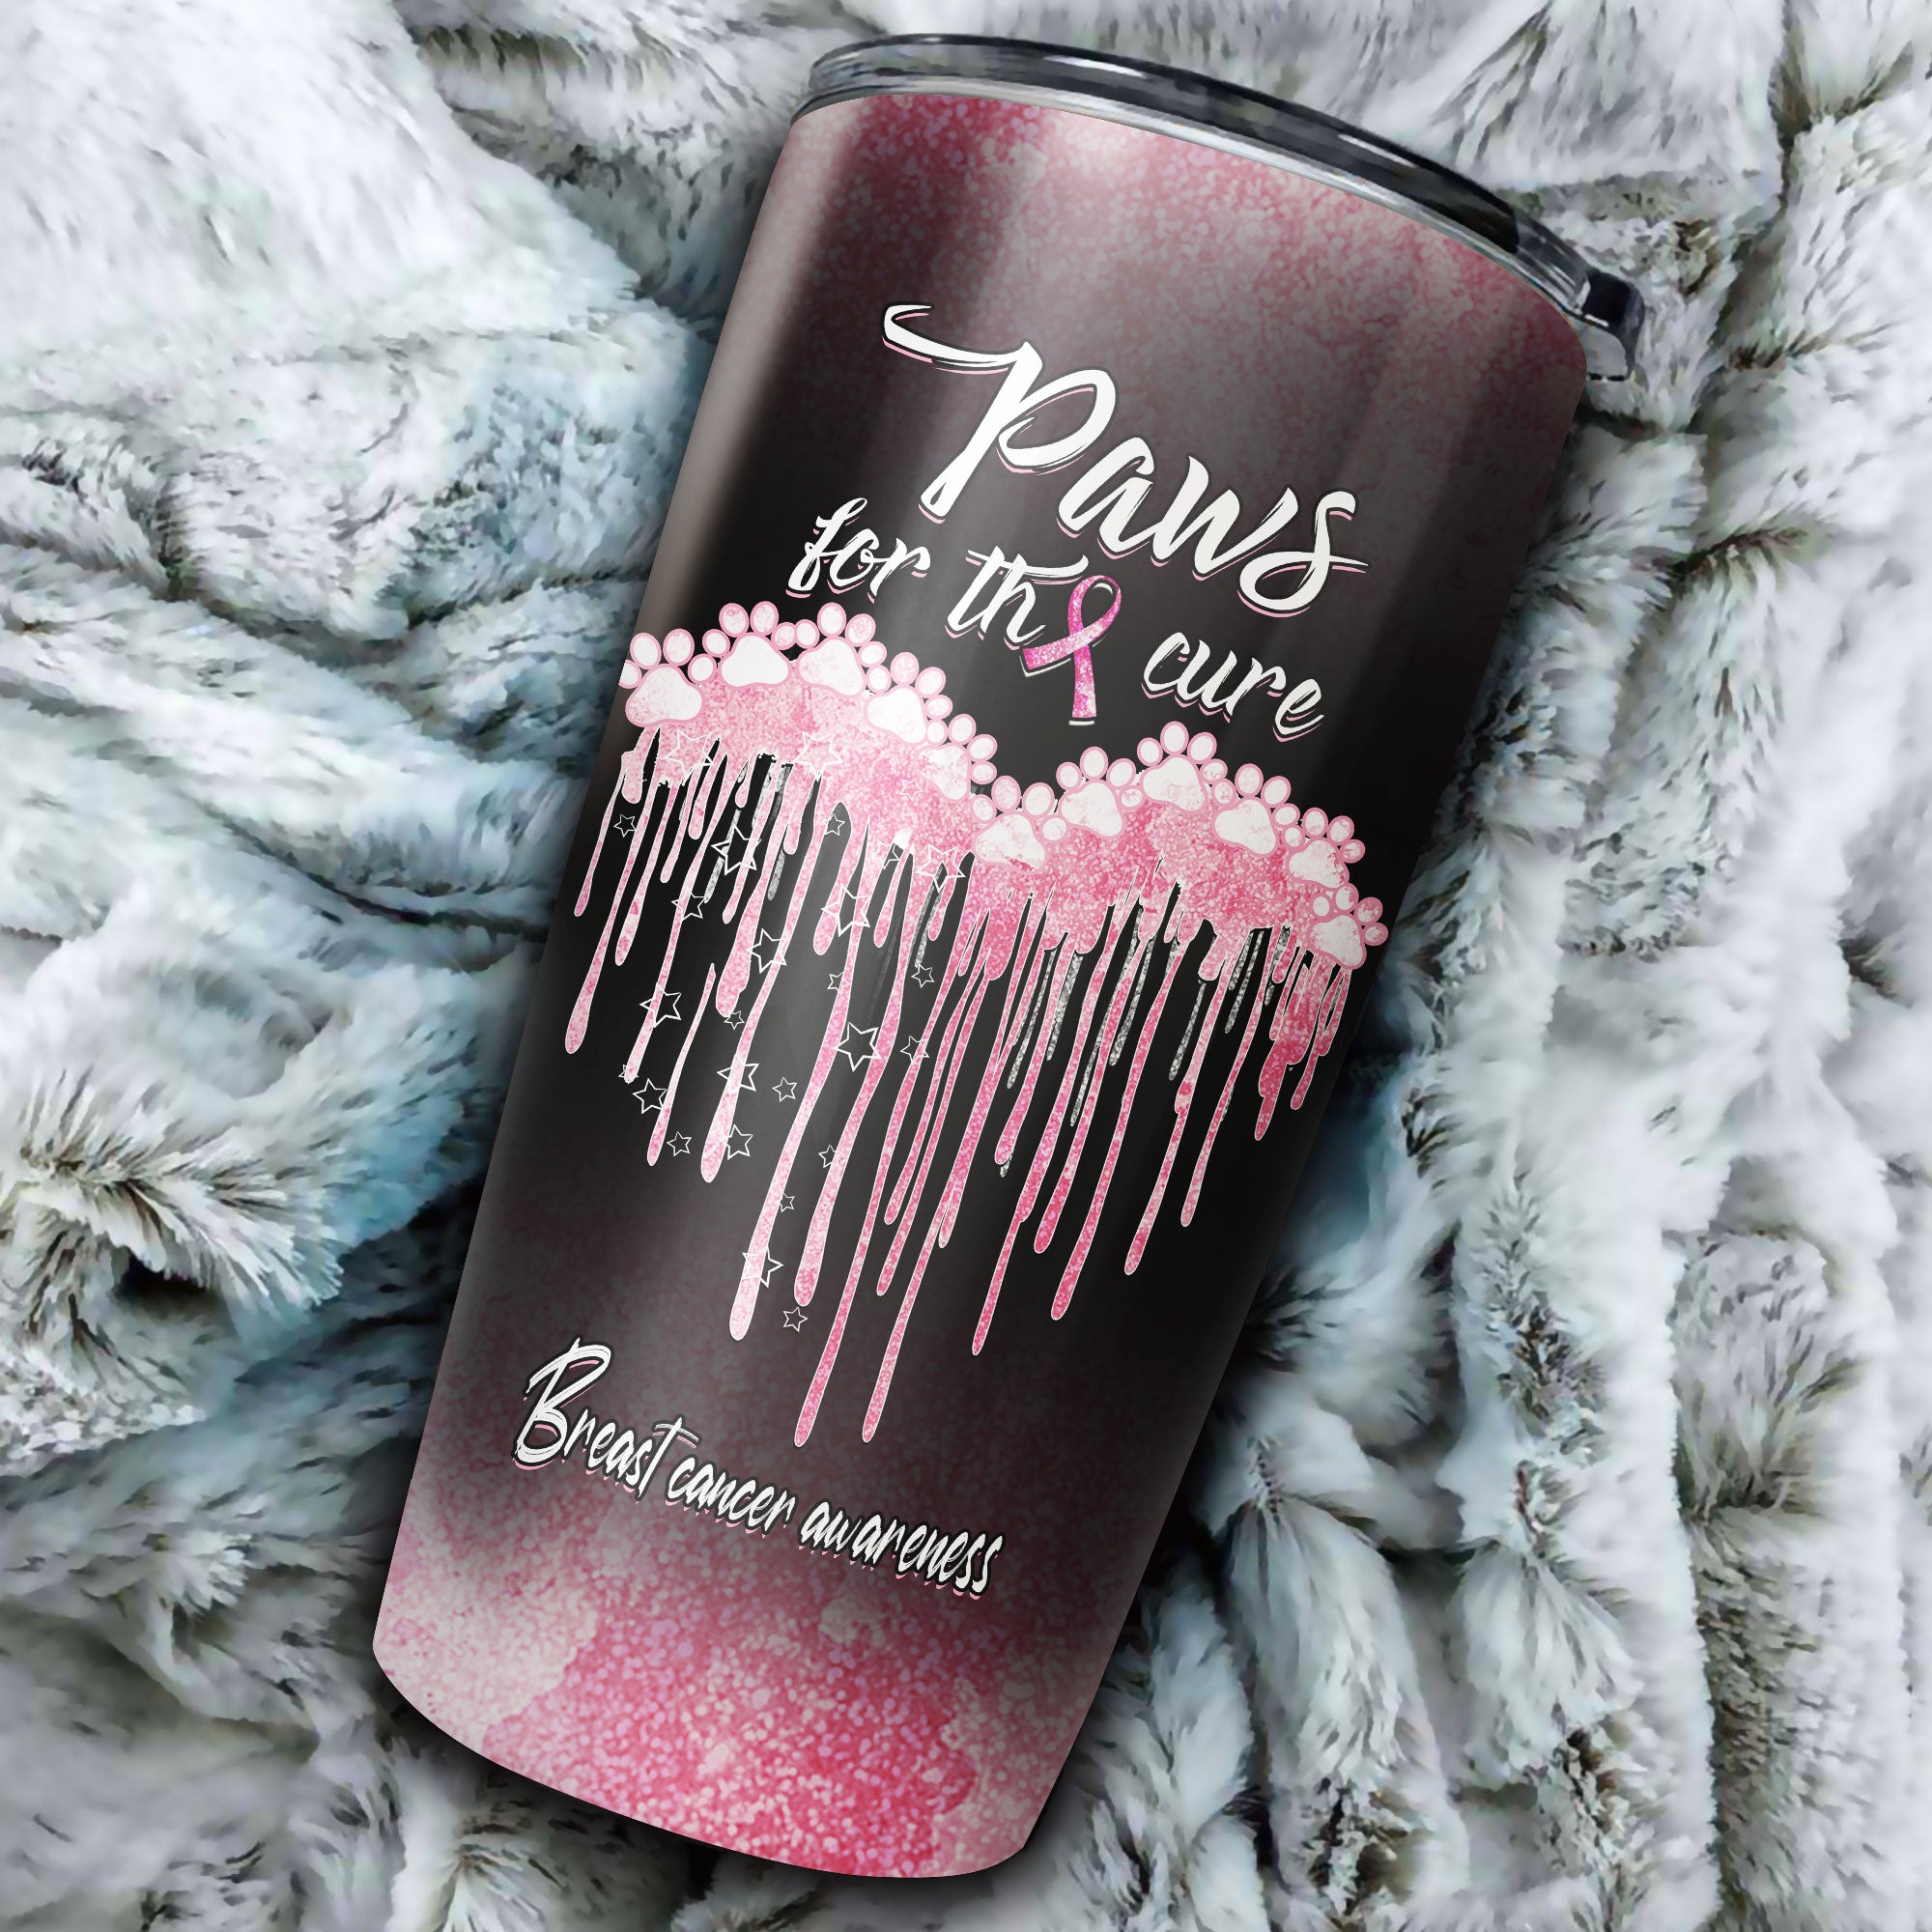 Breast Cancer Awareness  Personalized Paws For The Cure Tumbler - Lath0909215ki